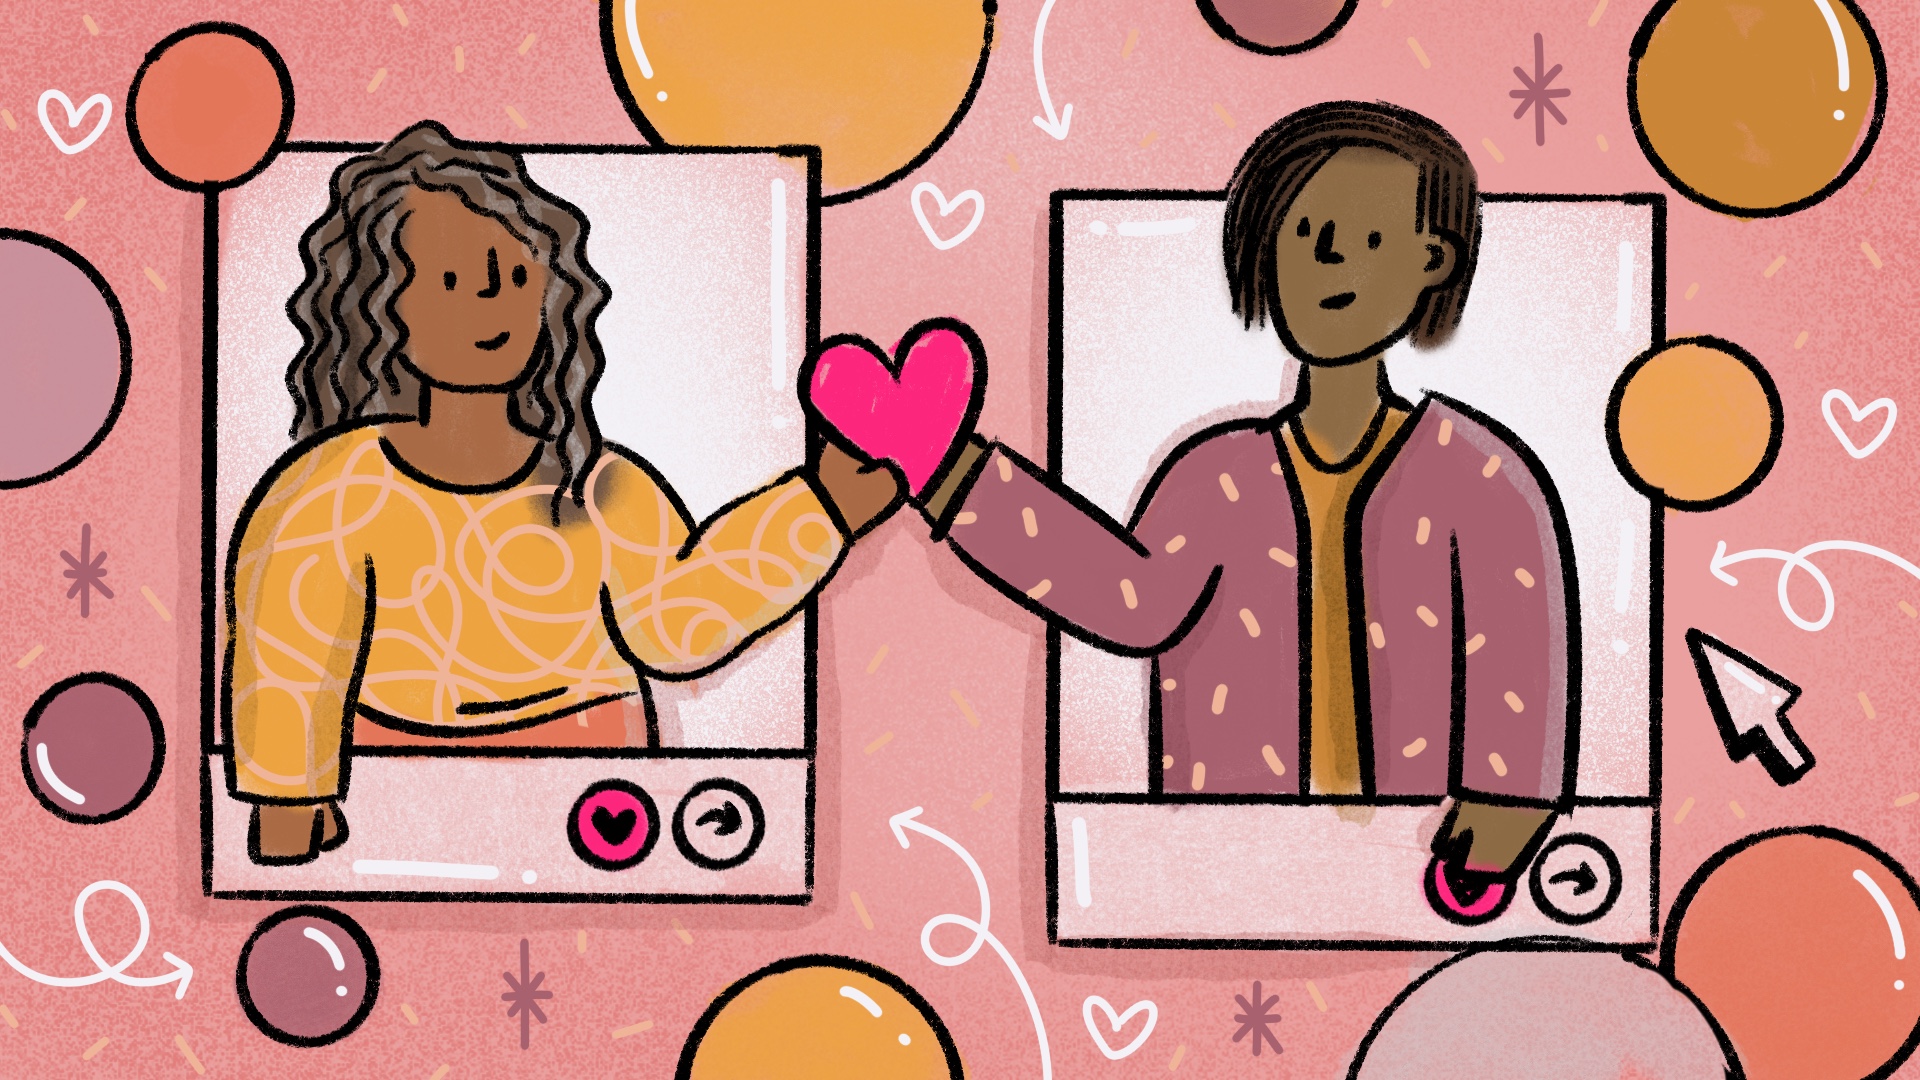 Self-love, community and joyful connections — when dating apps aren’t just for dating